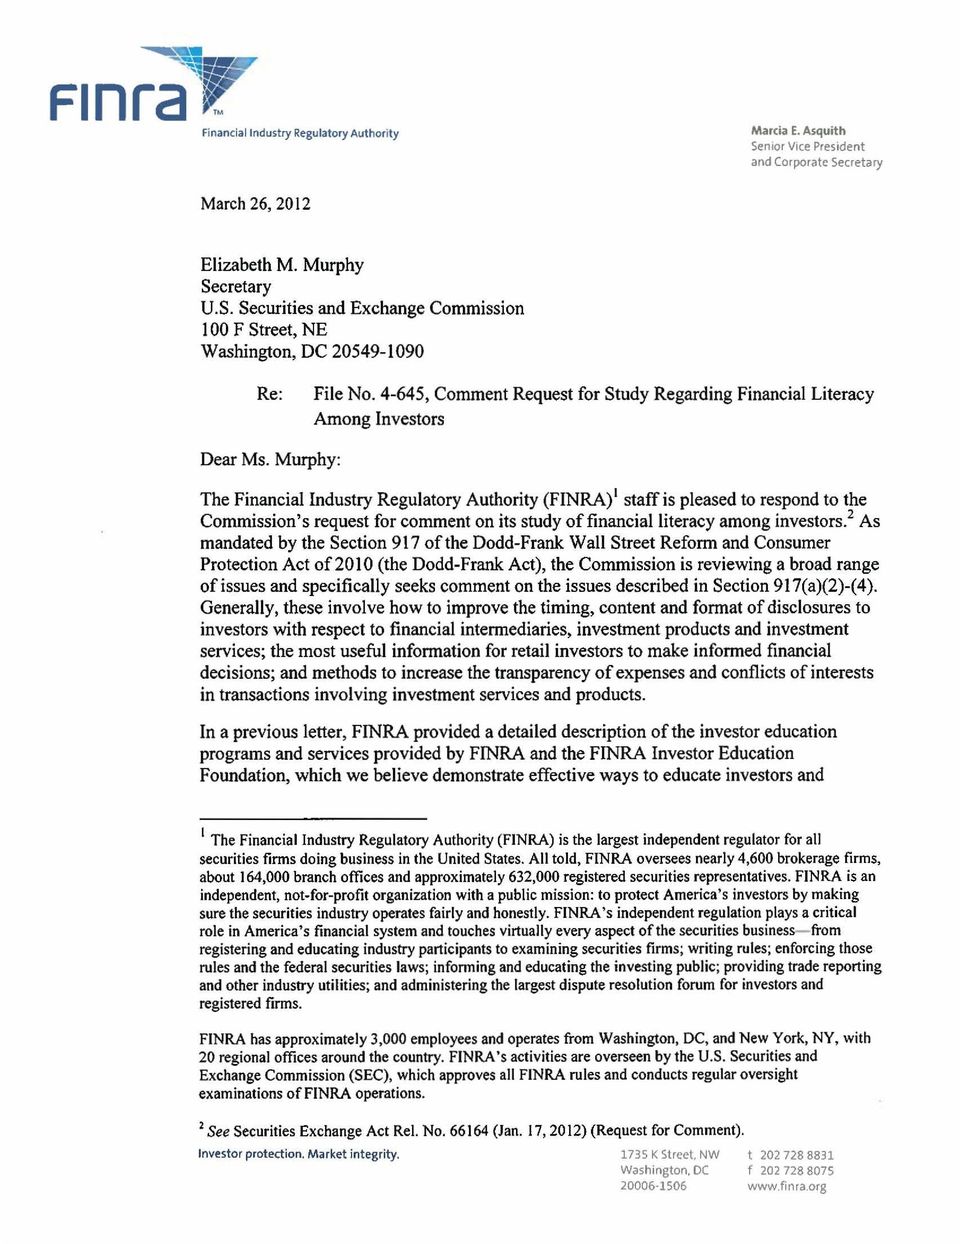 Murphy: The Financial Industry Regulatory Authority (FINRA)I staff is pleased to respond to the Commission's request for comment on its study of financial literacy among investors.